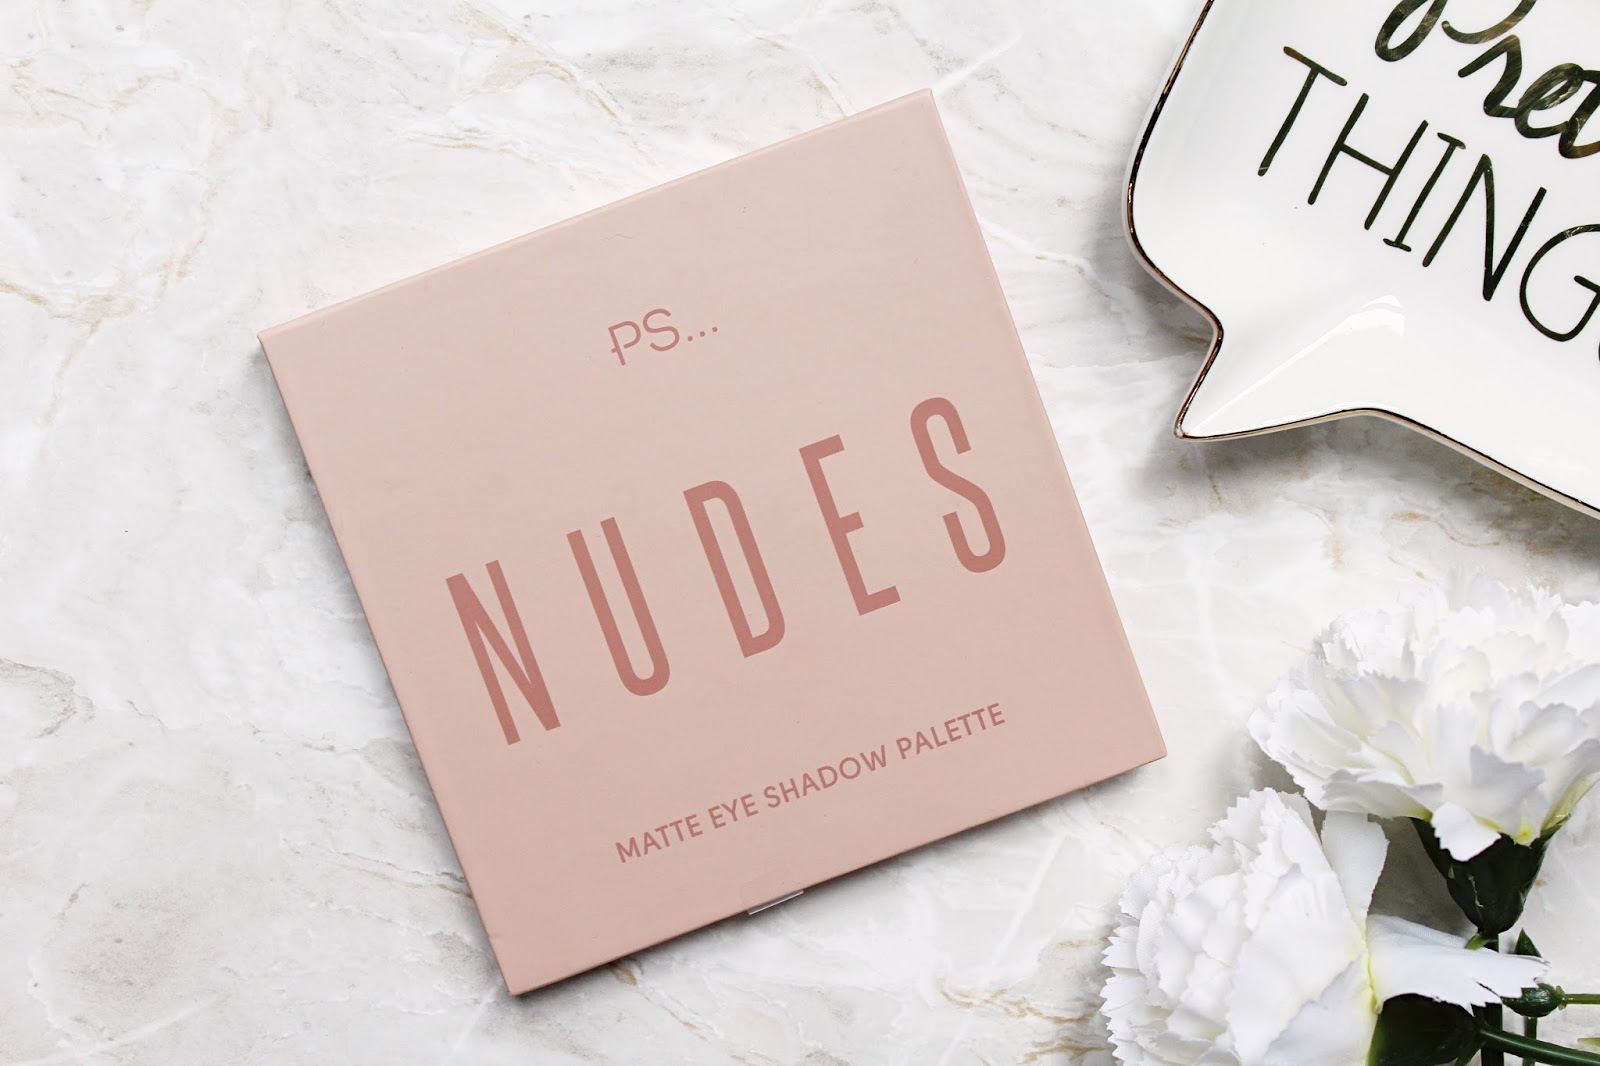 Primark Ps... Nudes Eyeshadow Palette Review (£4!) 